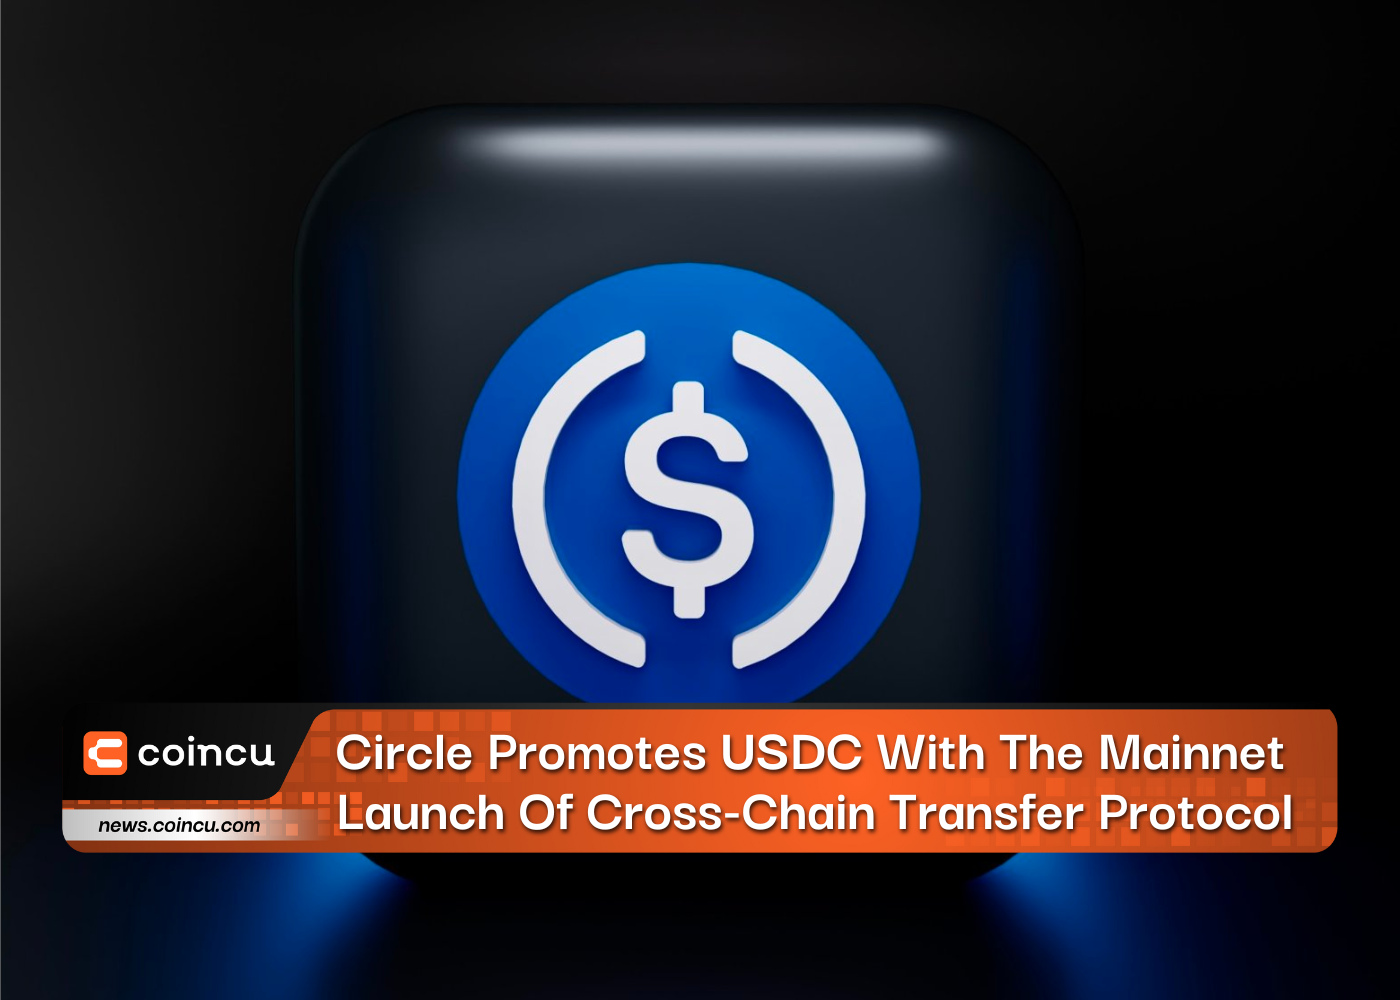 Circle Promotes USDC With The Mainnet Launch Of Cross-Chain Transfer Protocol